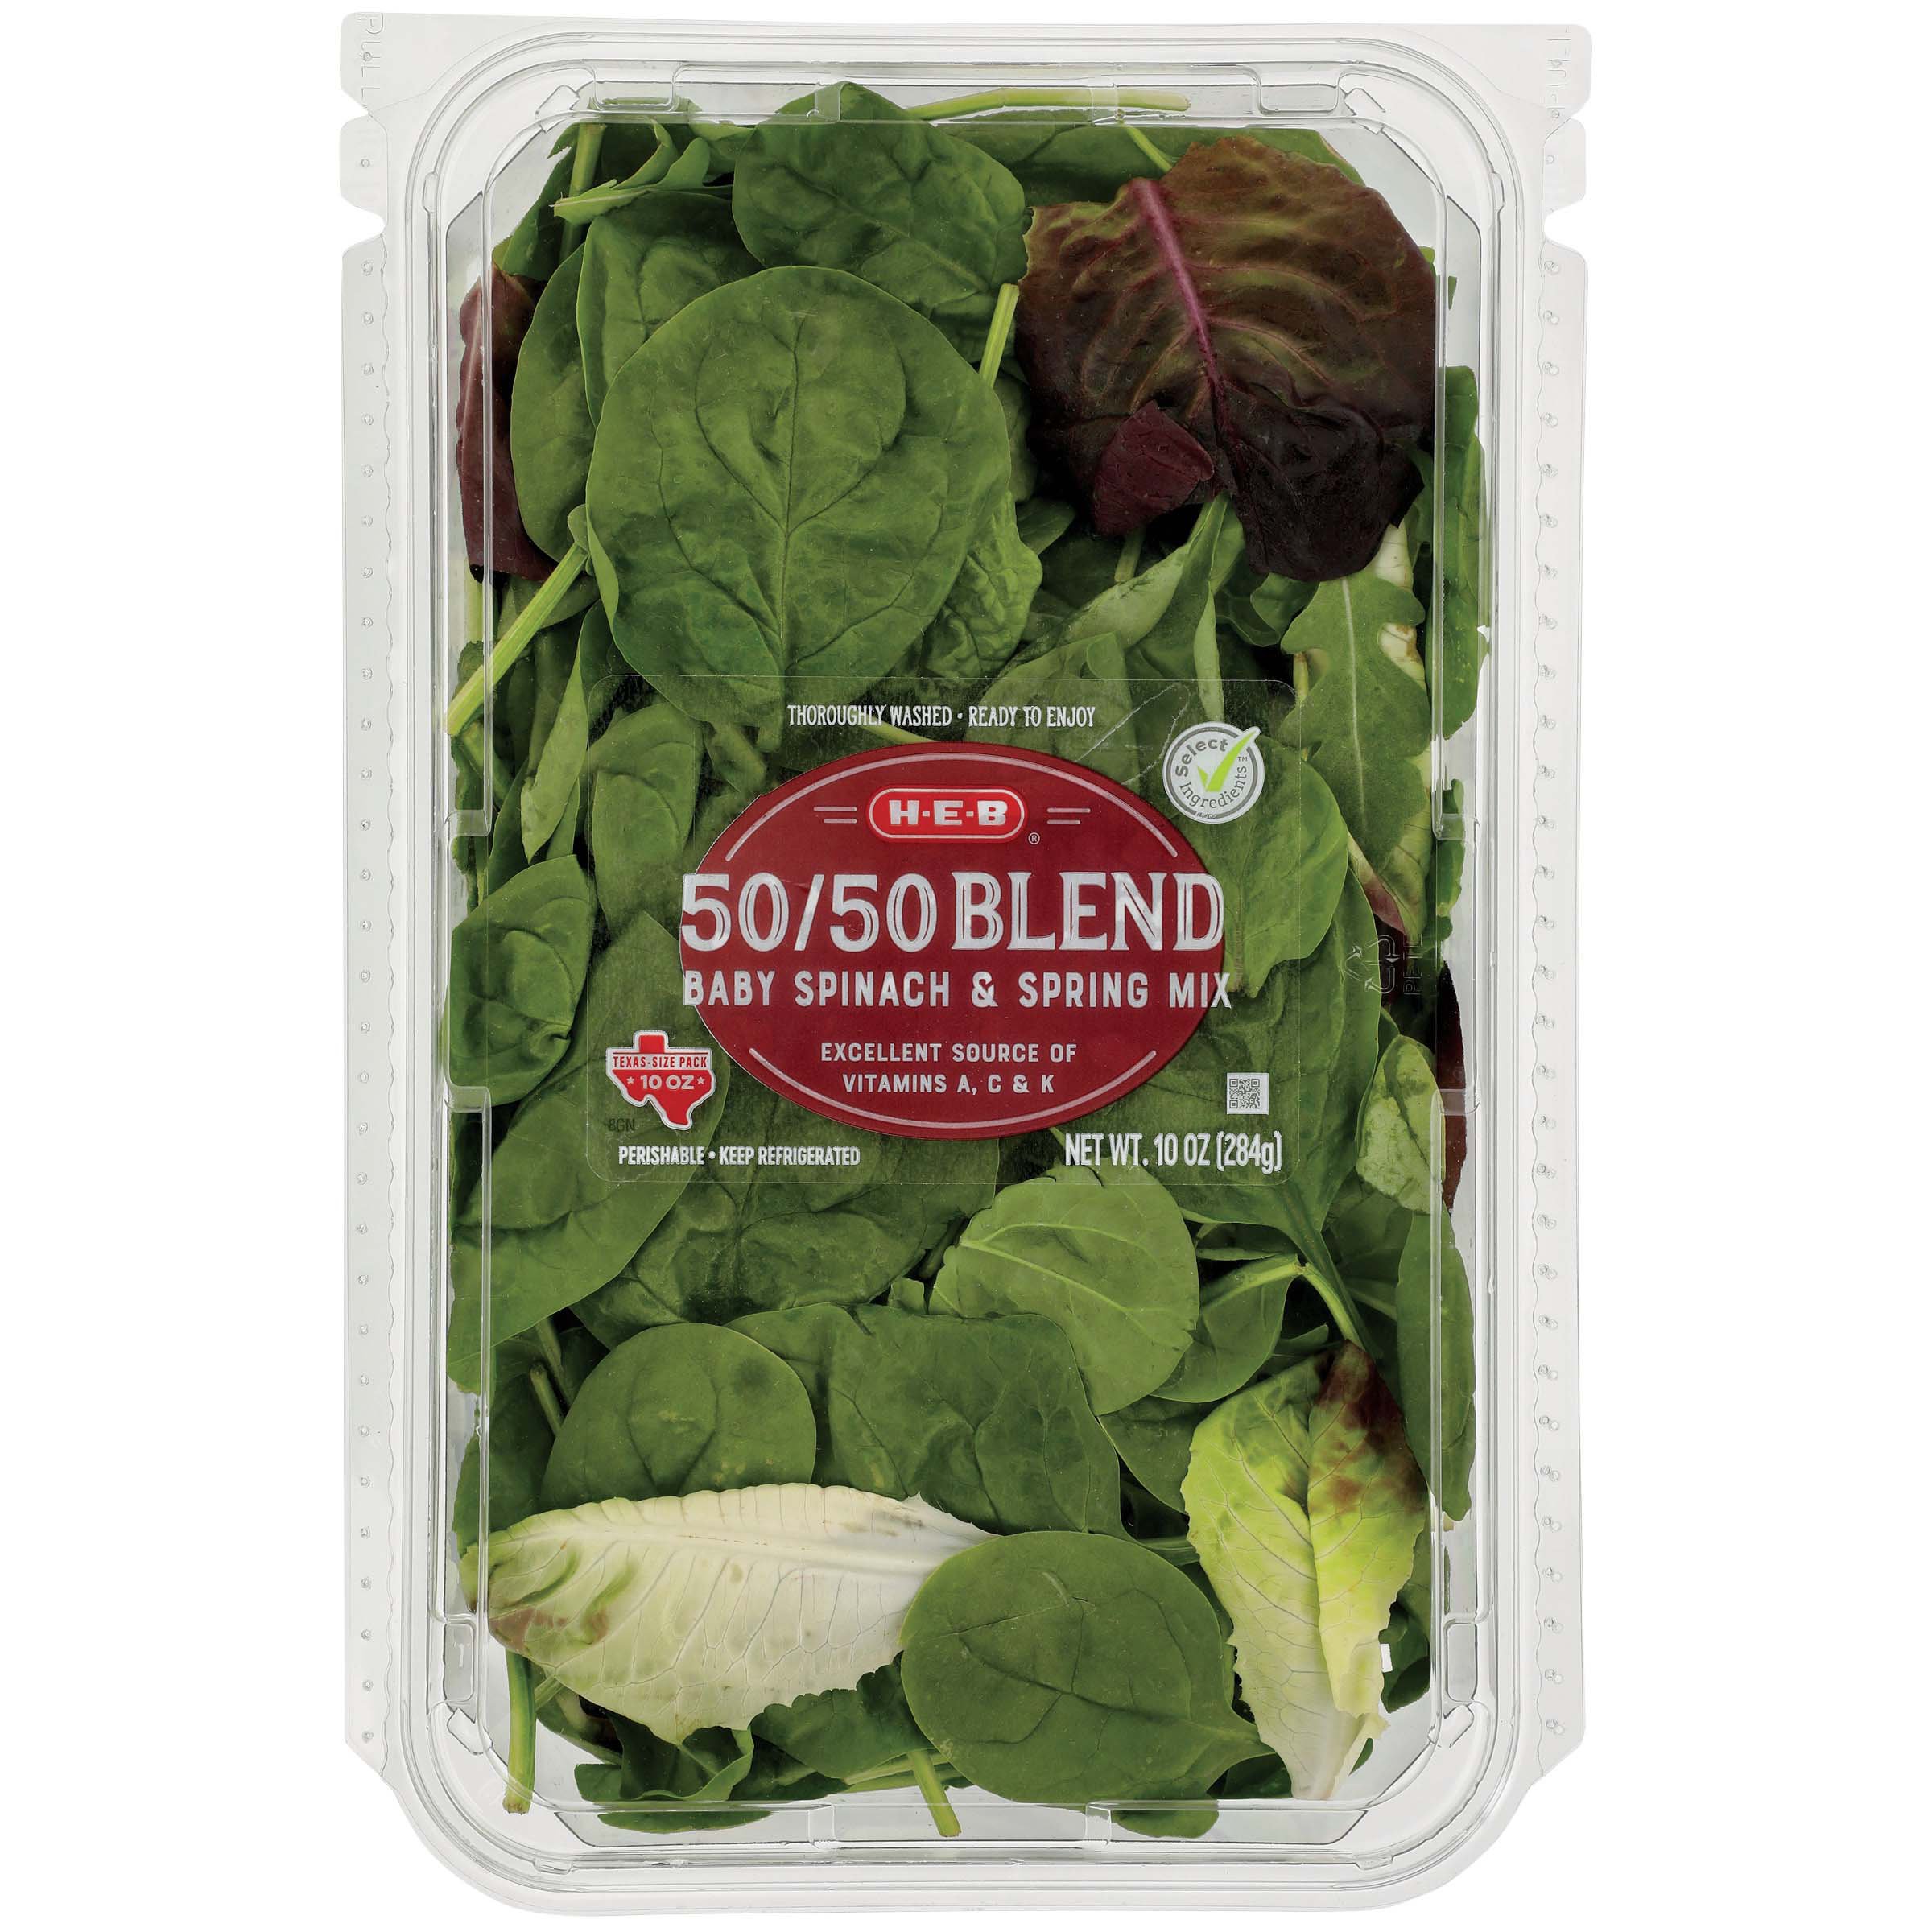 What's the Difference Between Spring Mix and 50/50?